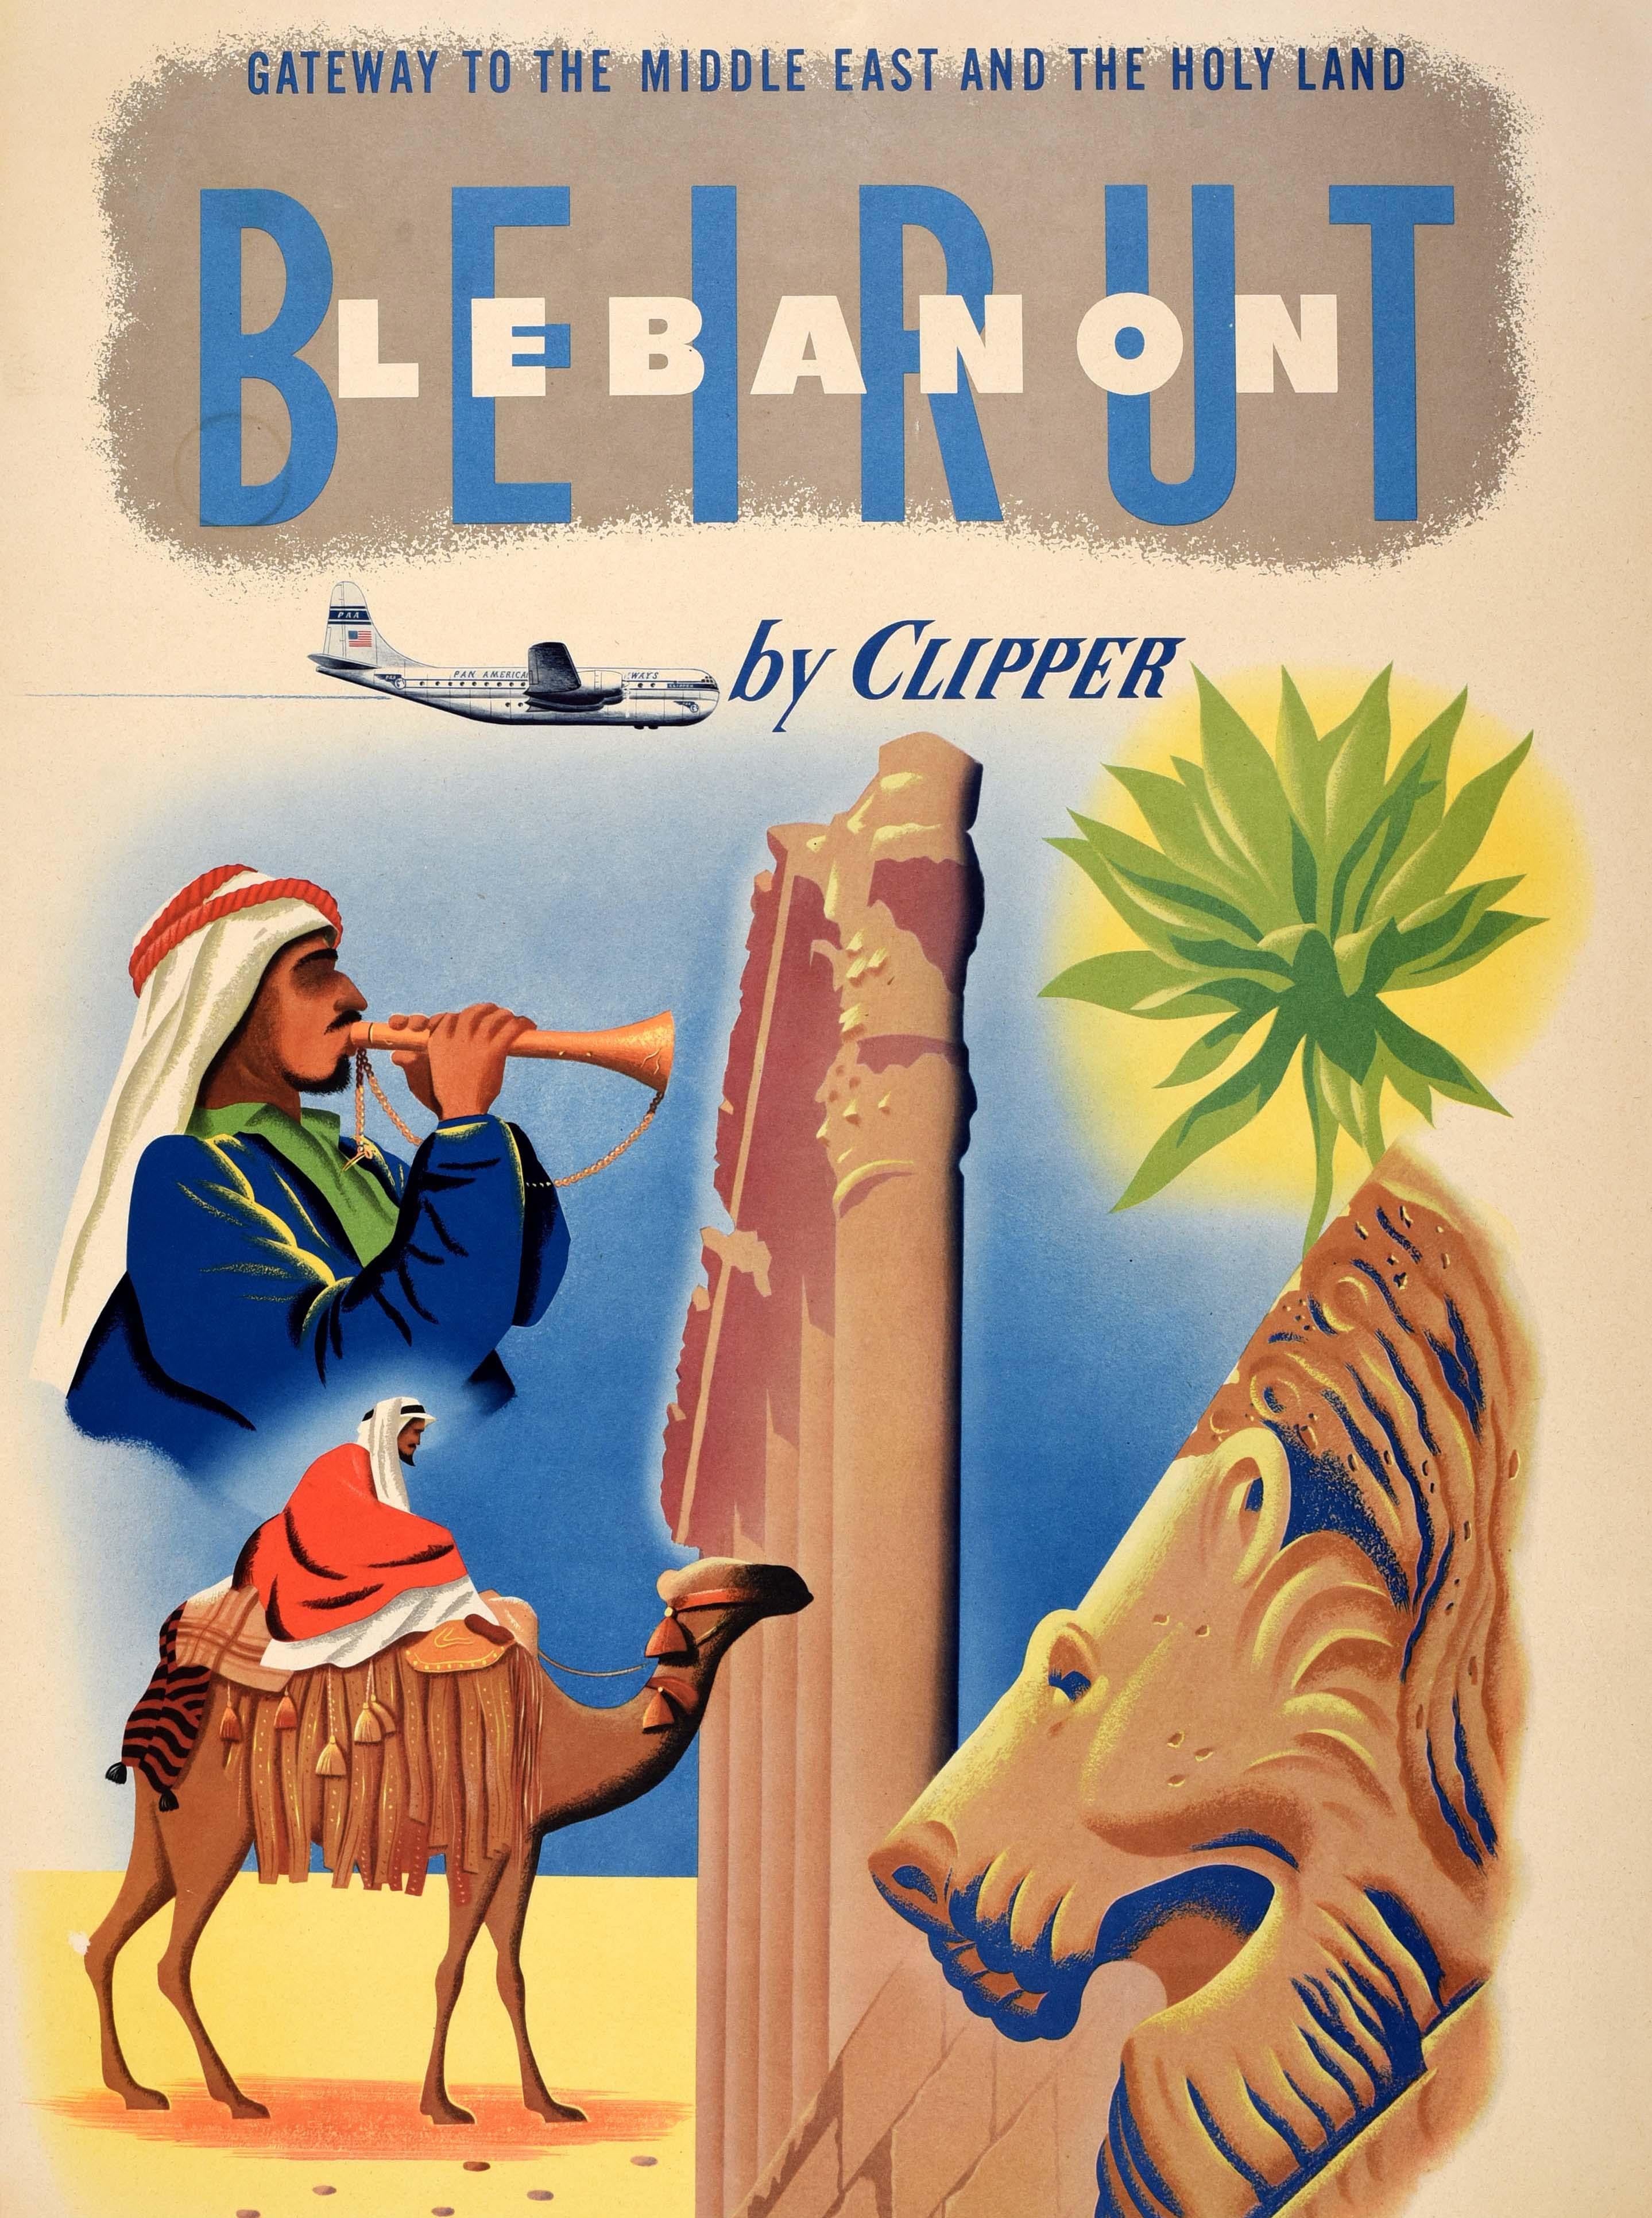 Original Vintage Travel Poster Beirut Lebanon PanAm Airline Middle East Gateway - Beige Print by Unknown